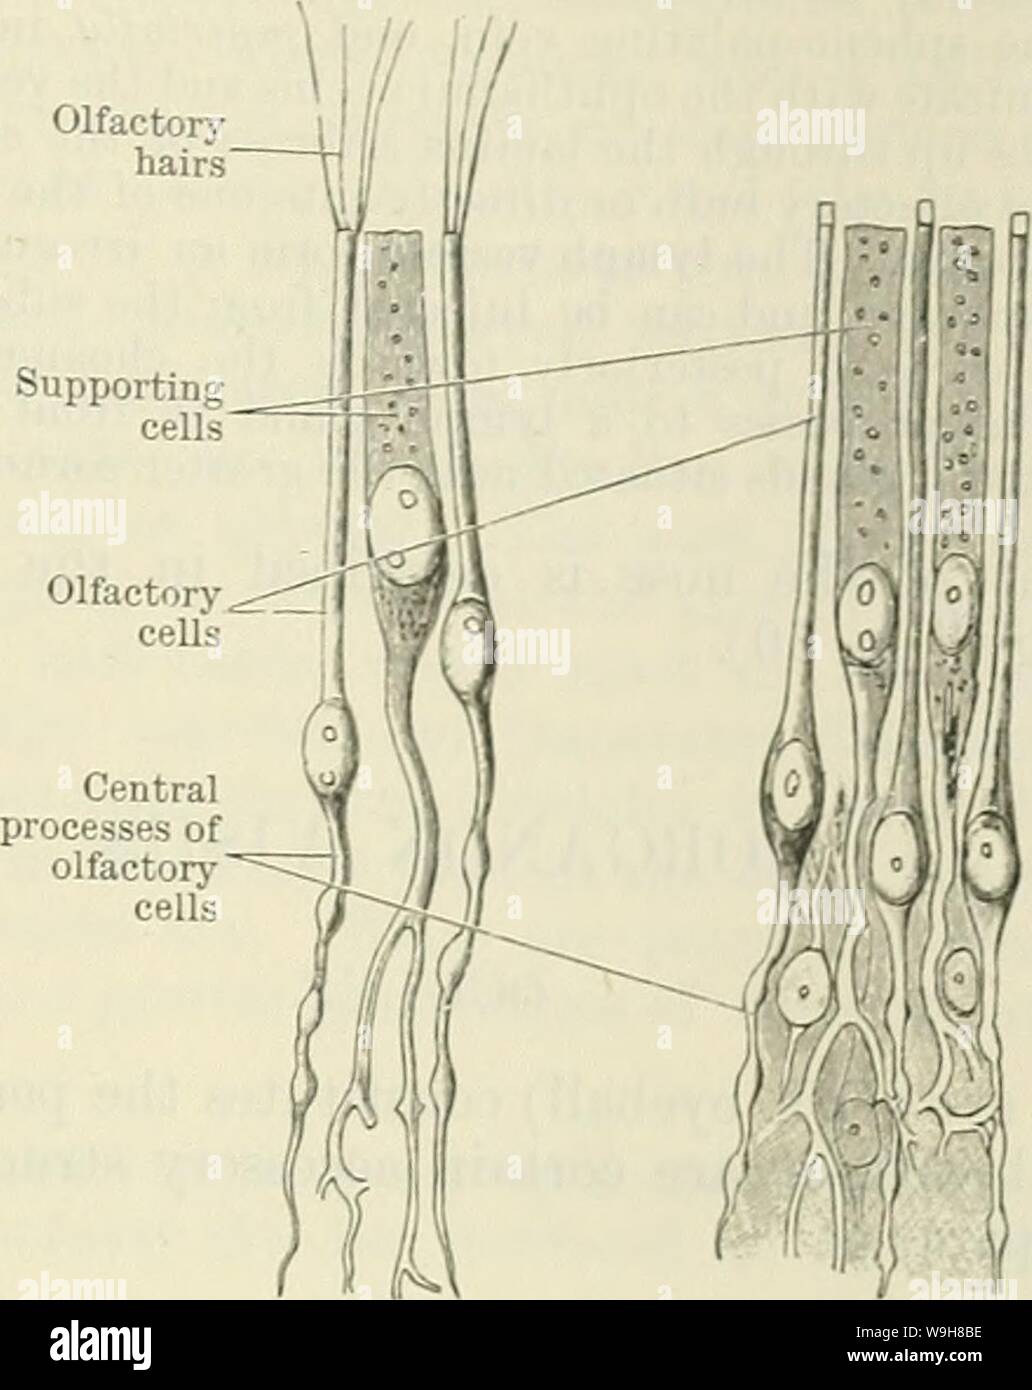 Archive image from page 838 of Cunningham's Text-book of anatomy (1914). Cunningham's Text-book of anatomy  cunninghamstextb00cunn Year: 1914 ( factory hairs Peripheral 'process B Body of -cell 'with Central process Fig. 676.âOlfactory and Supporting Cells. B. HuÂ°maU } M- Schultze. G- Human (â¼â¢ Brunn). iSxASAL CAVITY. 805 eUipS6 of ovalCenPf Td Â°r branChed Pr0Cesses' These cs contain par?s of the cells Zf)  ? Sltuated at the deeP ends of  columnar iÂ£:L m what is termed the of this columnar epithel- ium is covered by a thin limiting membrane. 2. Olfactory Cells. â These are bipolar nerve-c Stock Photo